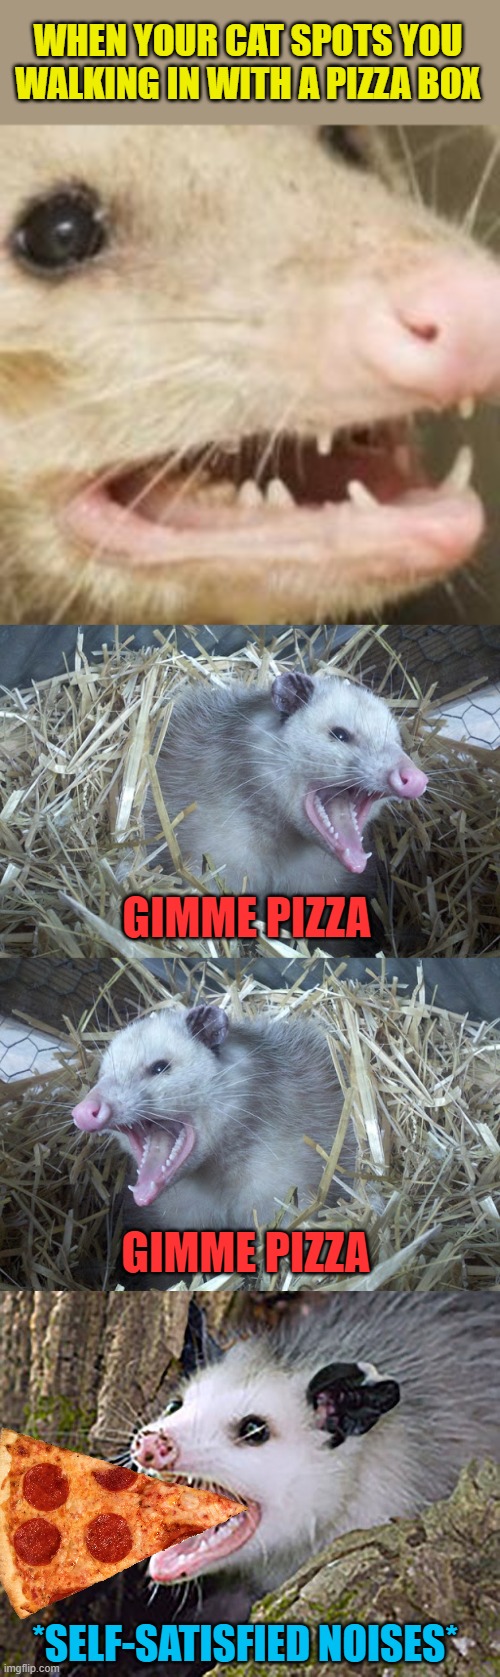 Weird cat | WHEN YOUR CAT SPOTS YOU WALKING IN WITH A PIZZA BOX; GIMME PIZZA; GIMME PIZZA; *SELF-SATISFIED NOISES* | image tagged in rat,possum,happy | made w/ Imgflip meme maker